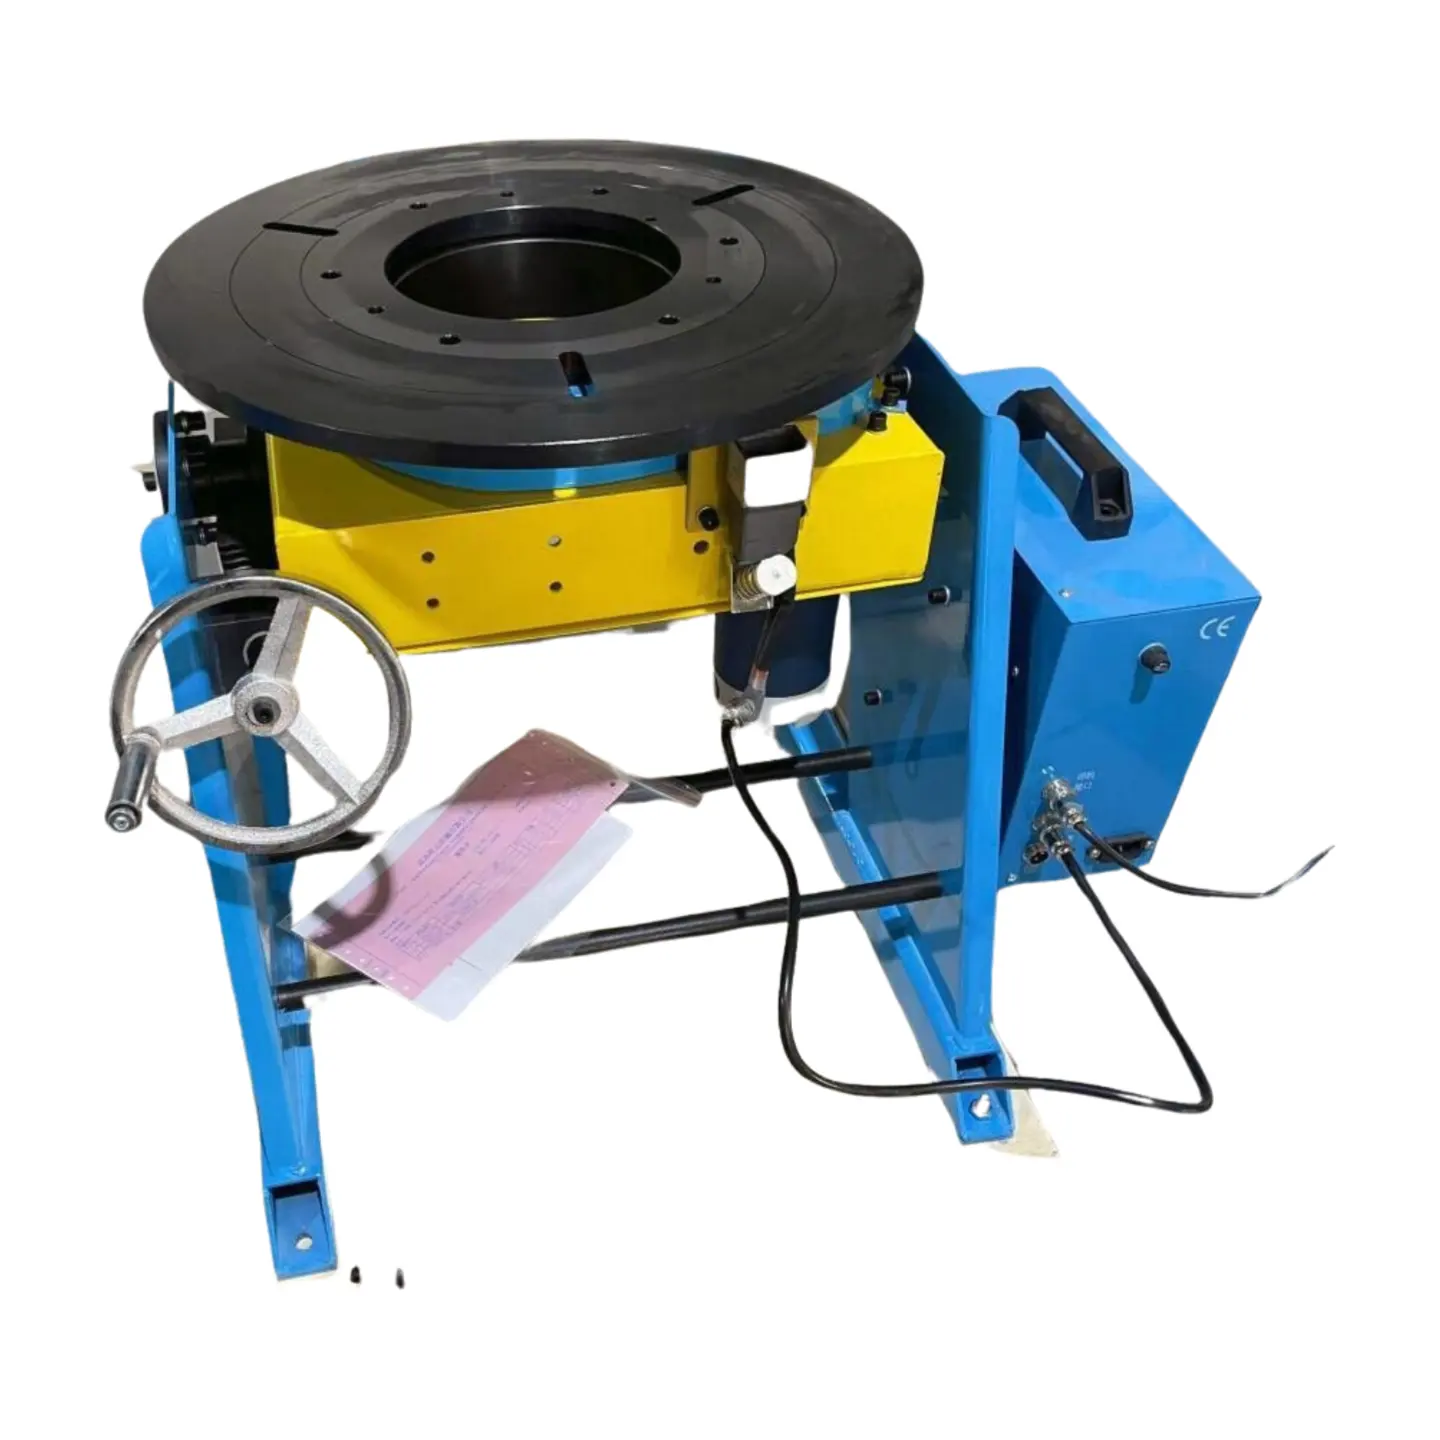 HD-300 300KG Heavy Duty Welding Positioner Rotary Welding Turntable Table Weld Positioning Equipment without Chuck